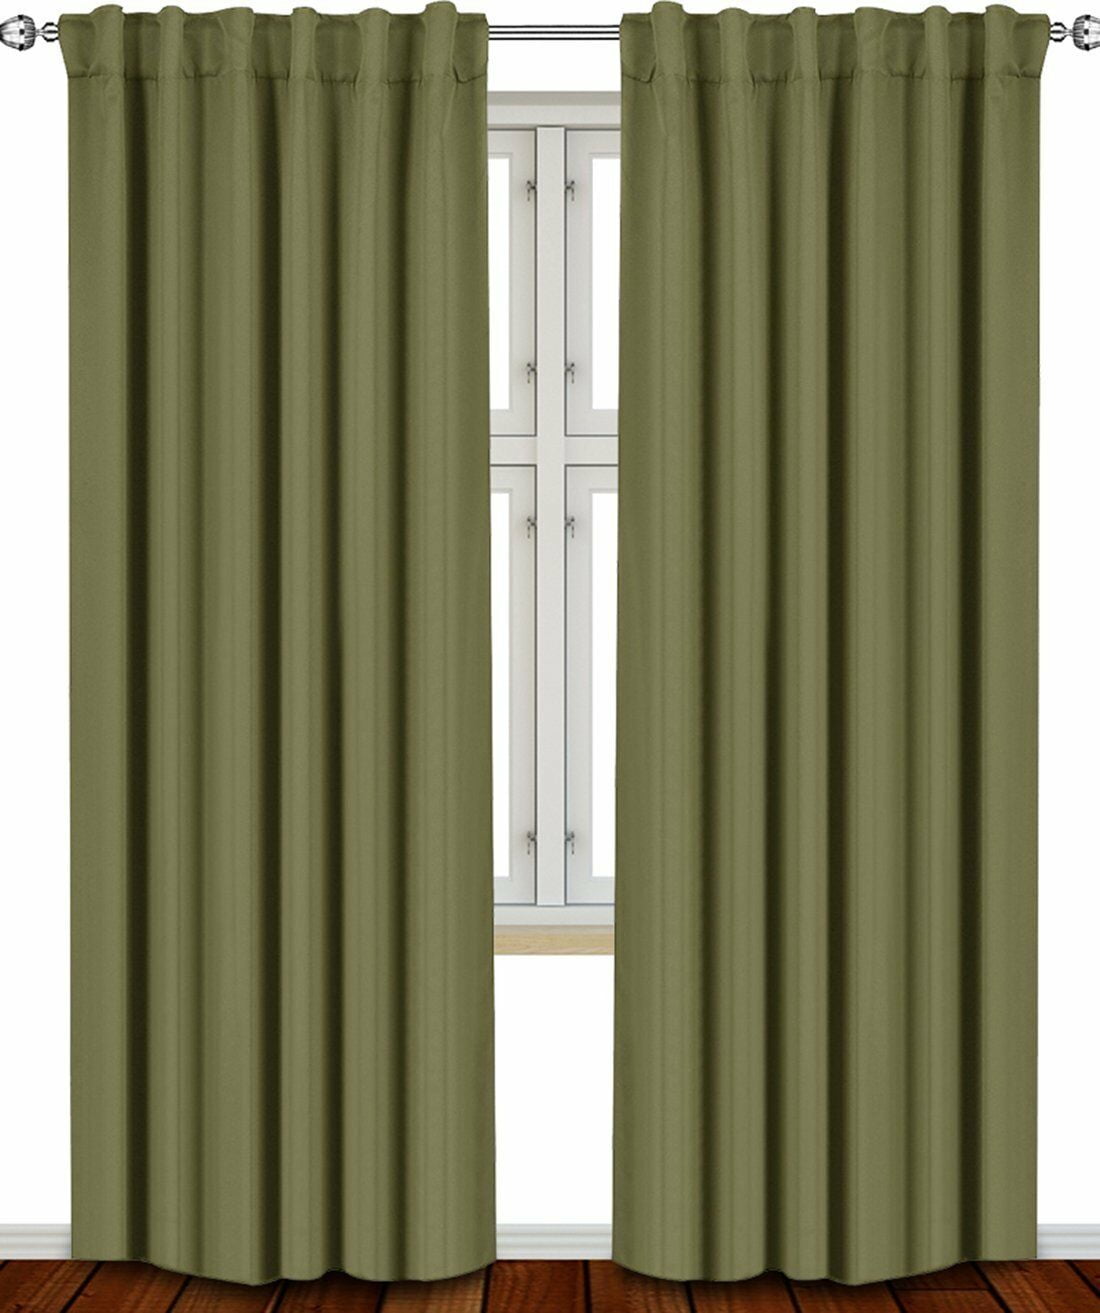 Window Curtains Blackout Room Thermal Insulated 2 Panels 52x84" Utopia Bedding 